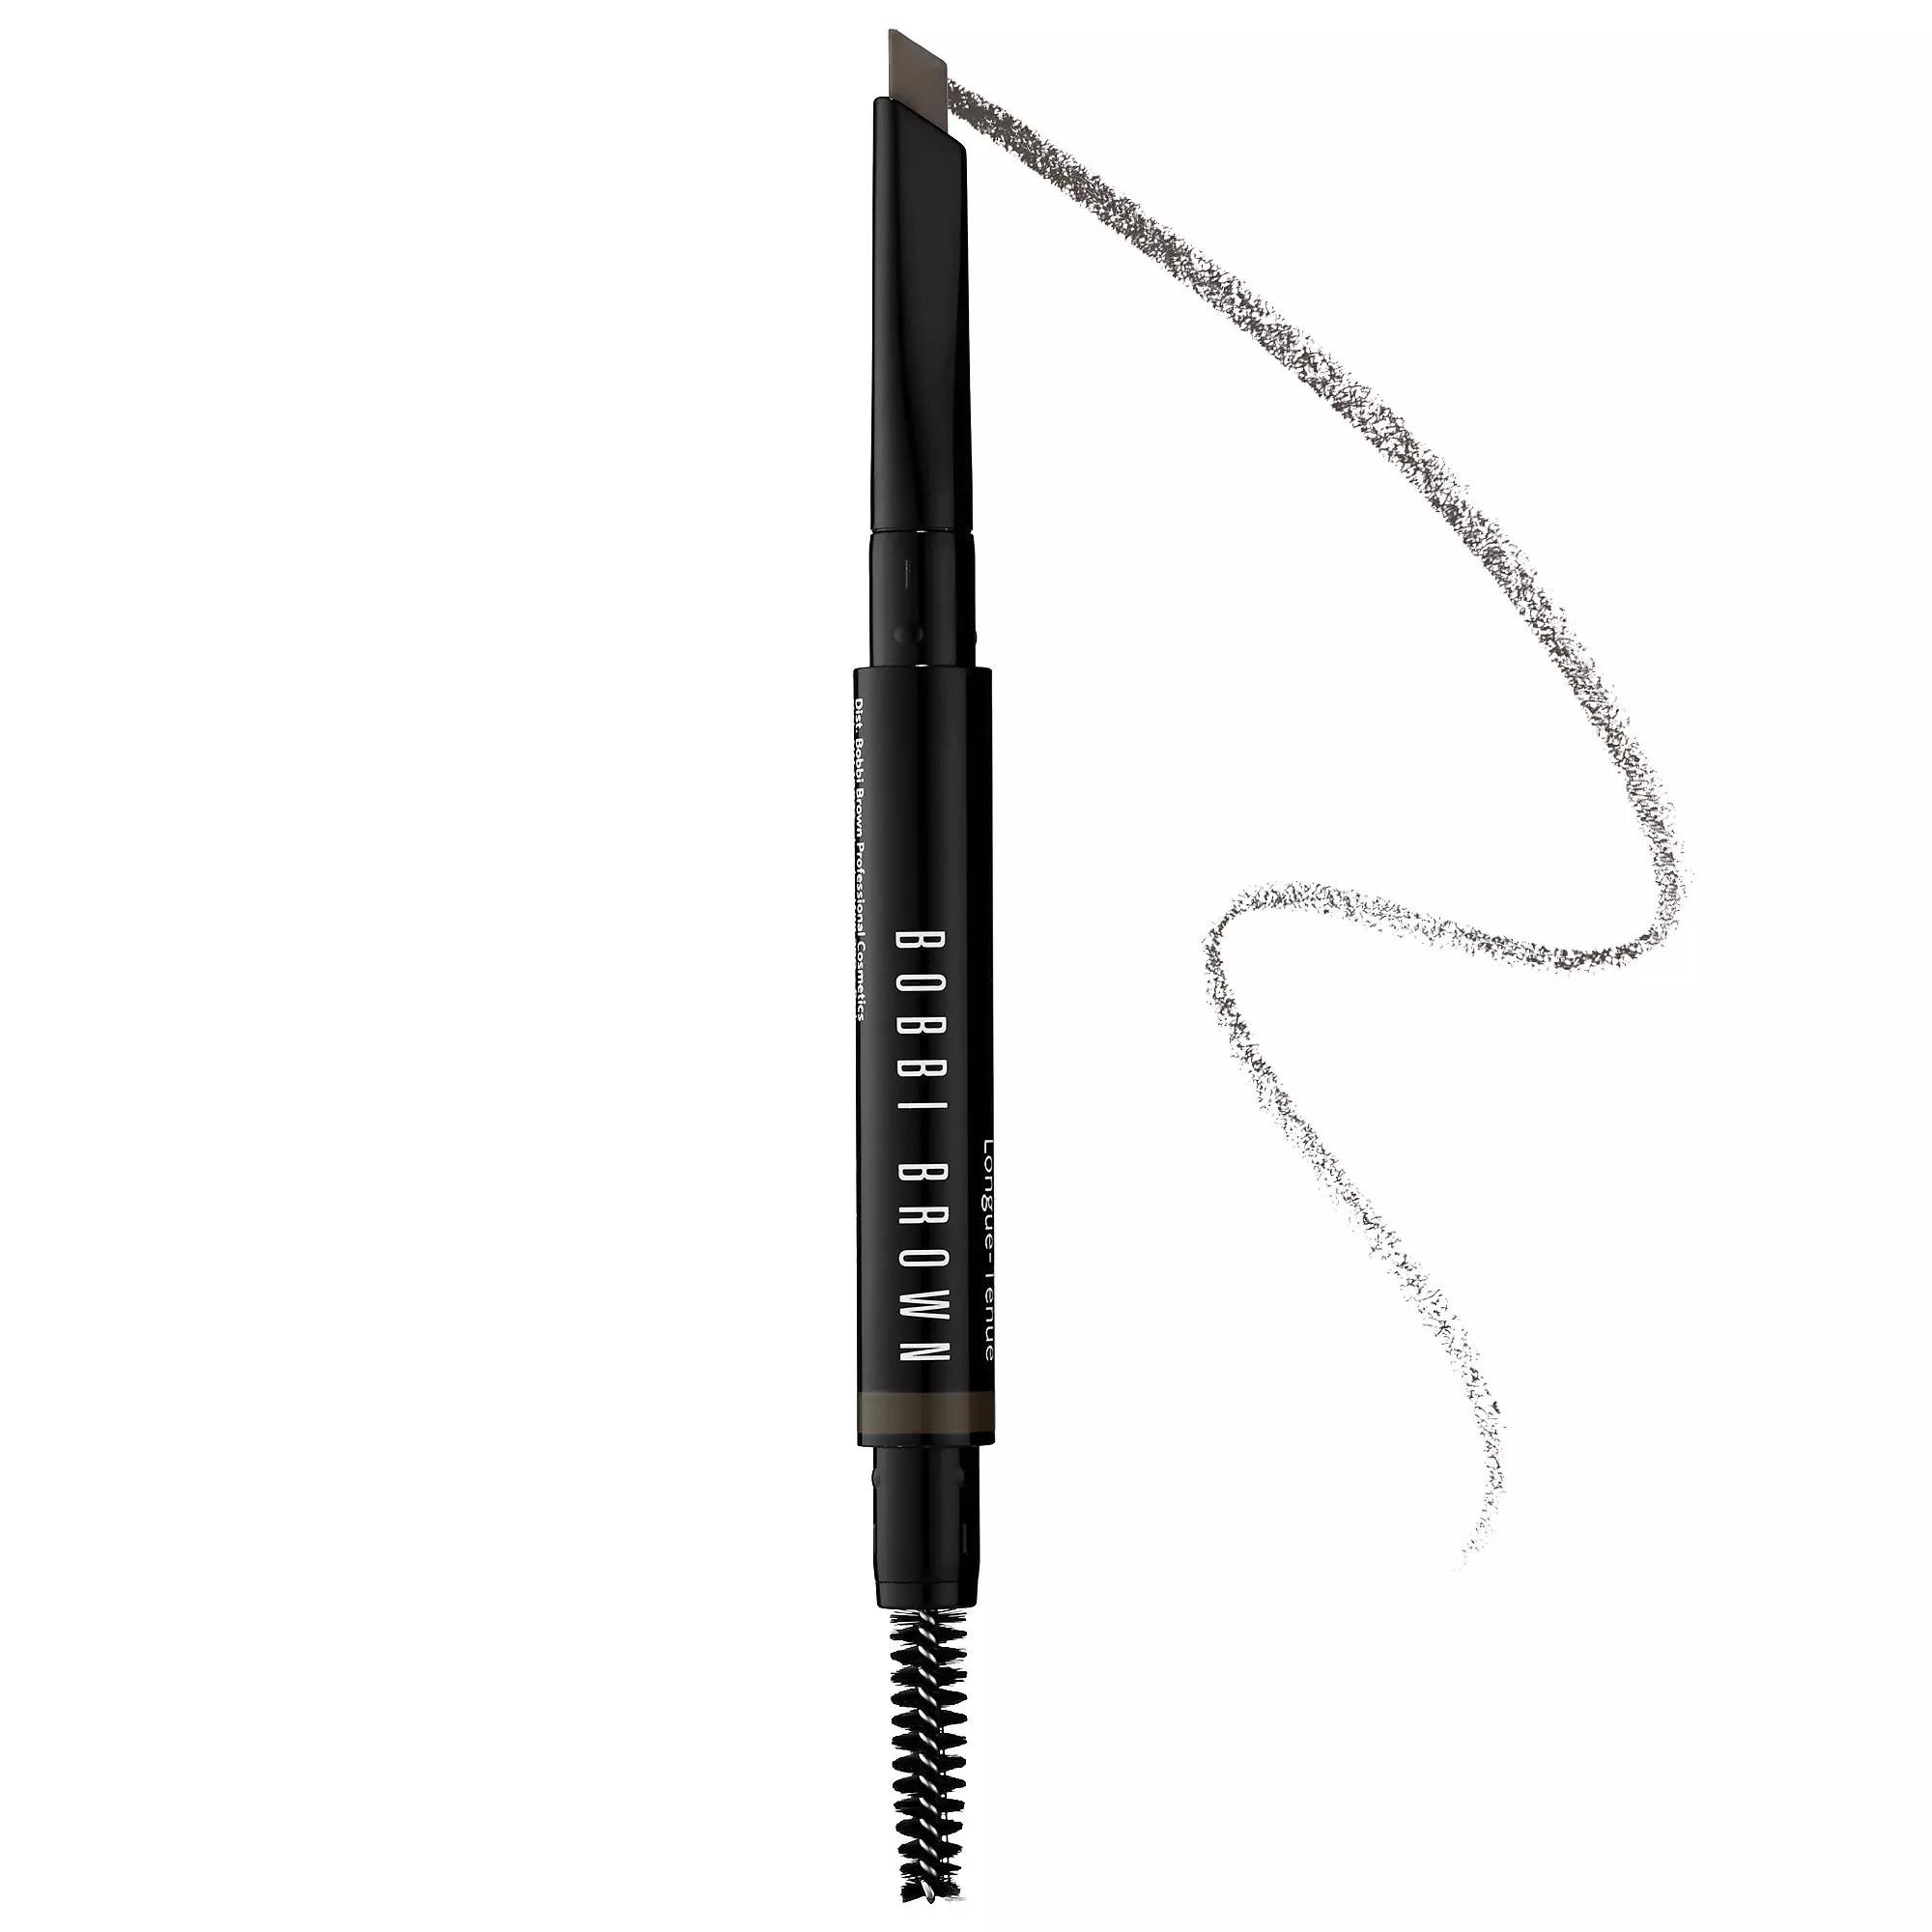 Bobbi Brown Perfectly Defined Long-Wear Brow Pencil Saddle